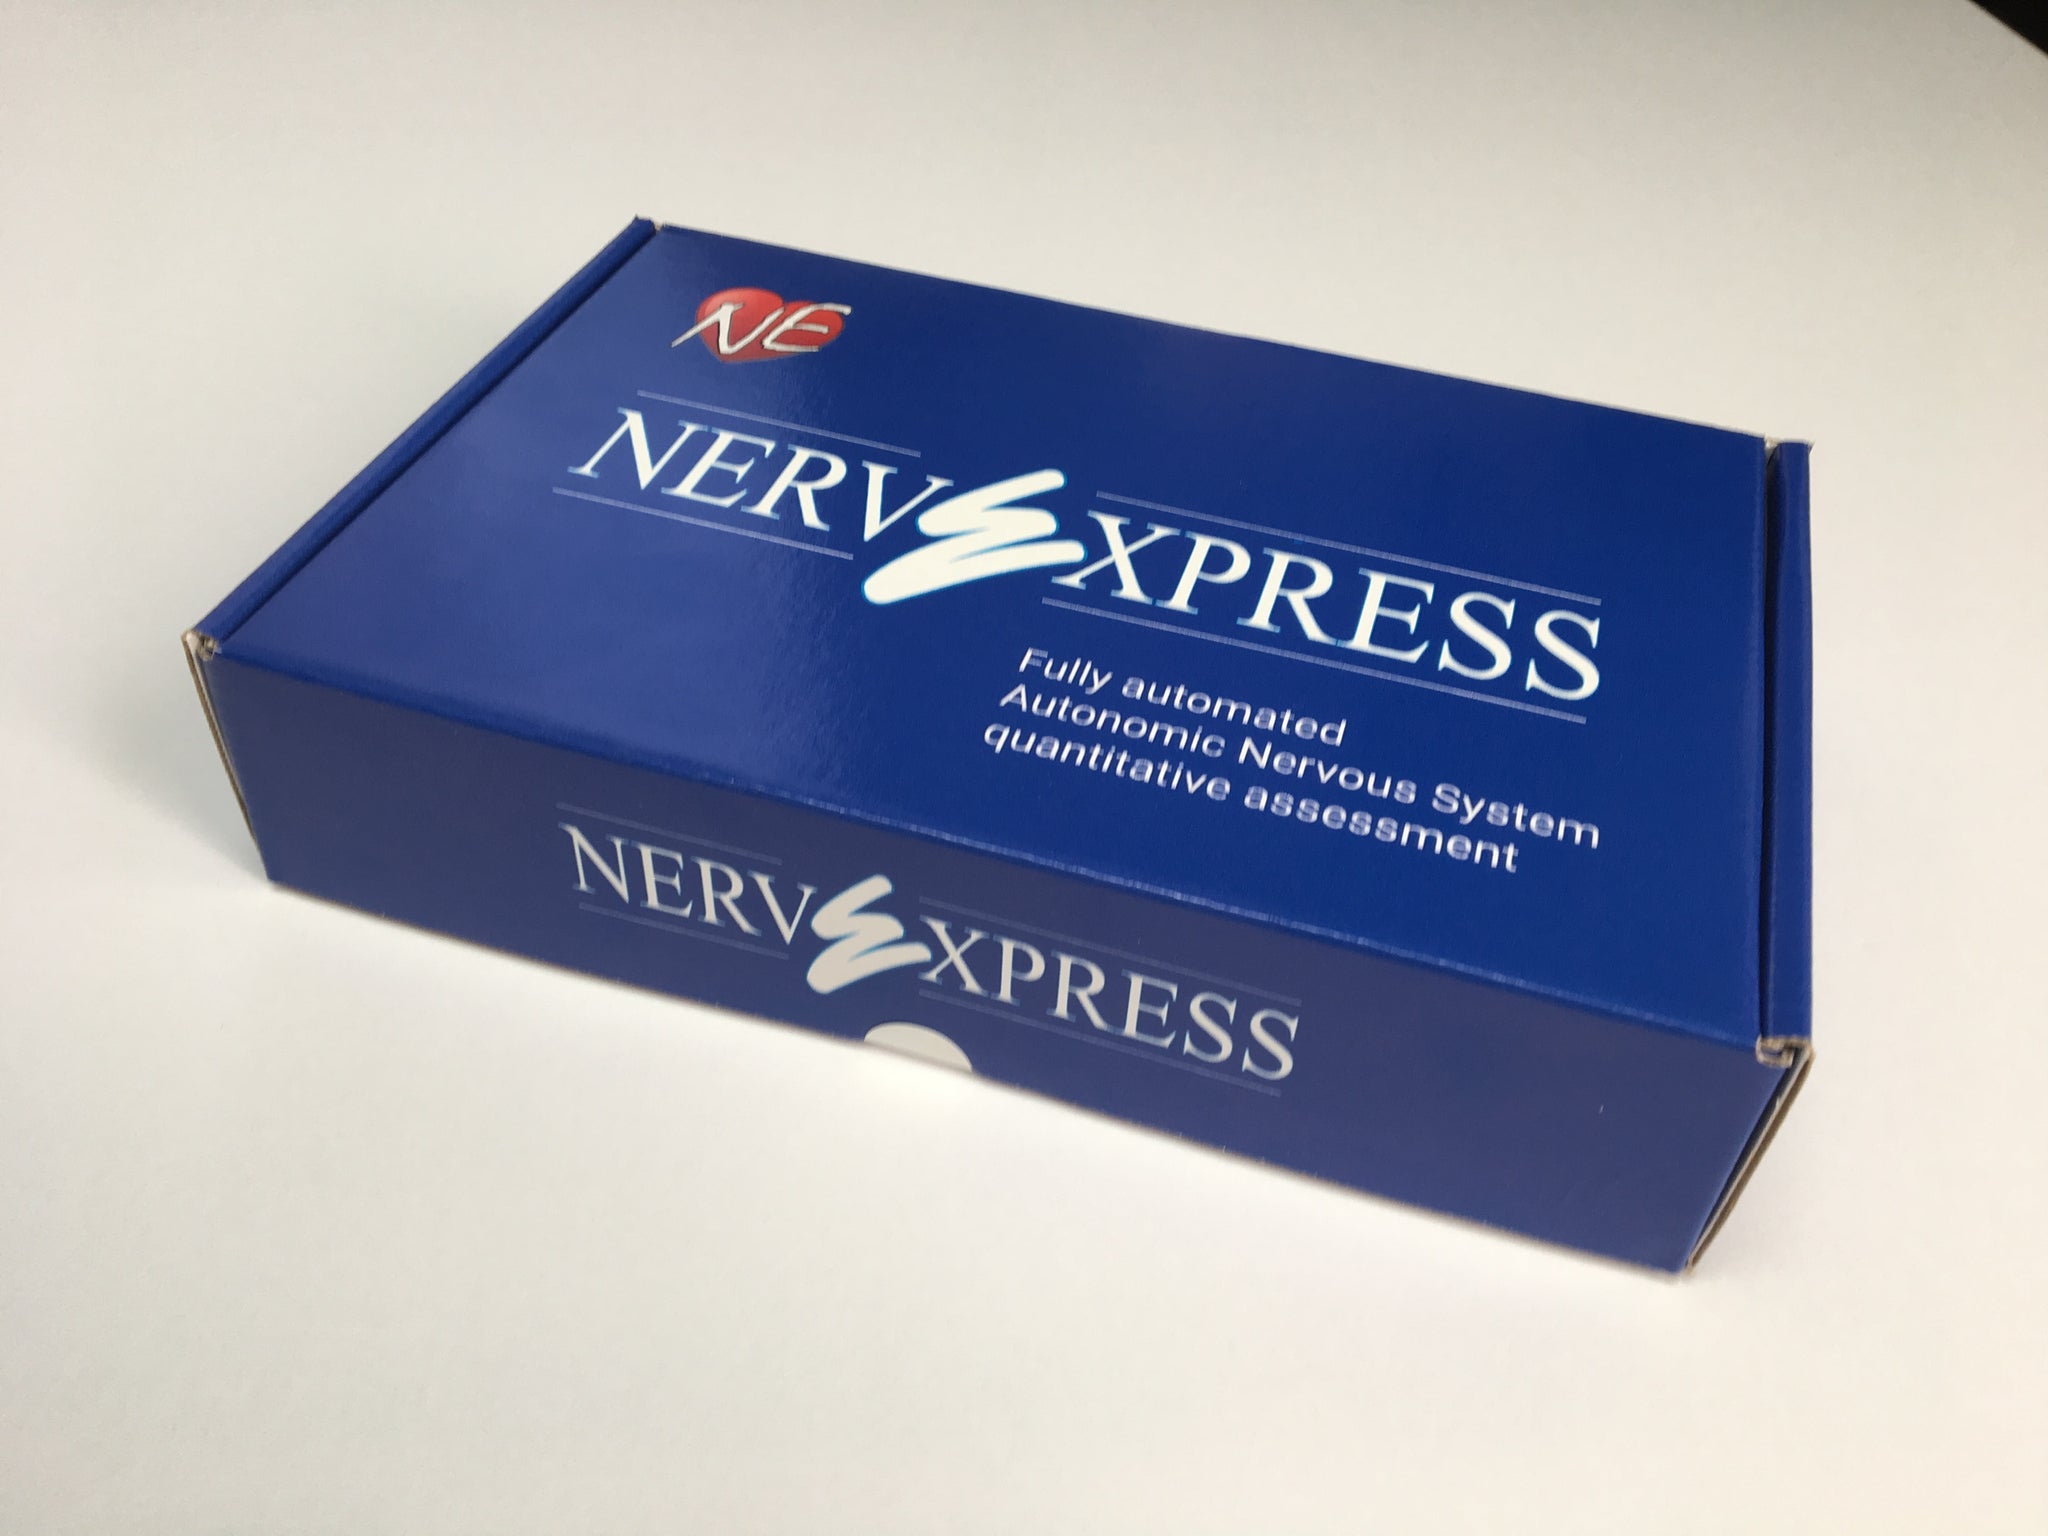 Upgrade from any Nerve-Express version to the Nerve-Express on MAC OS